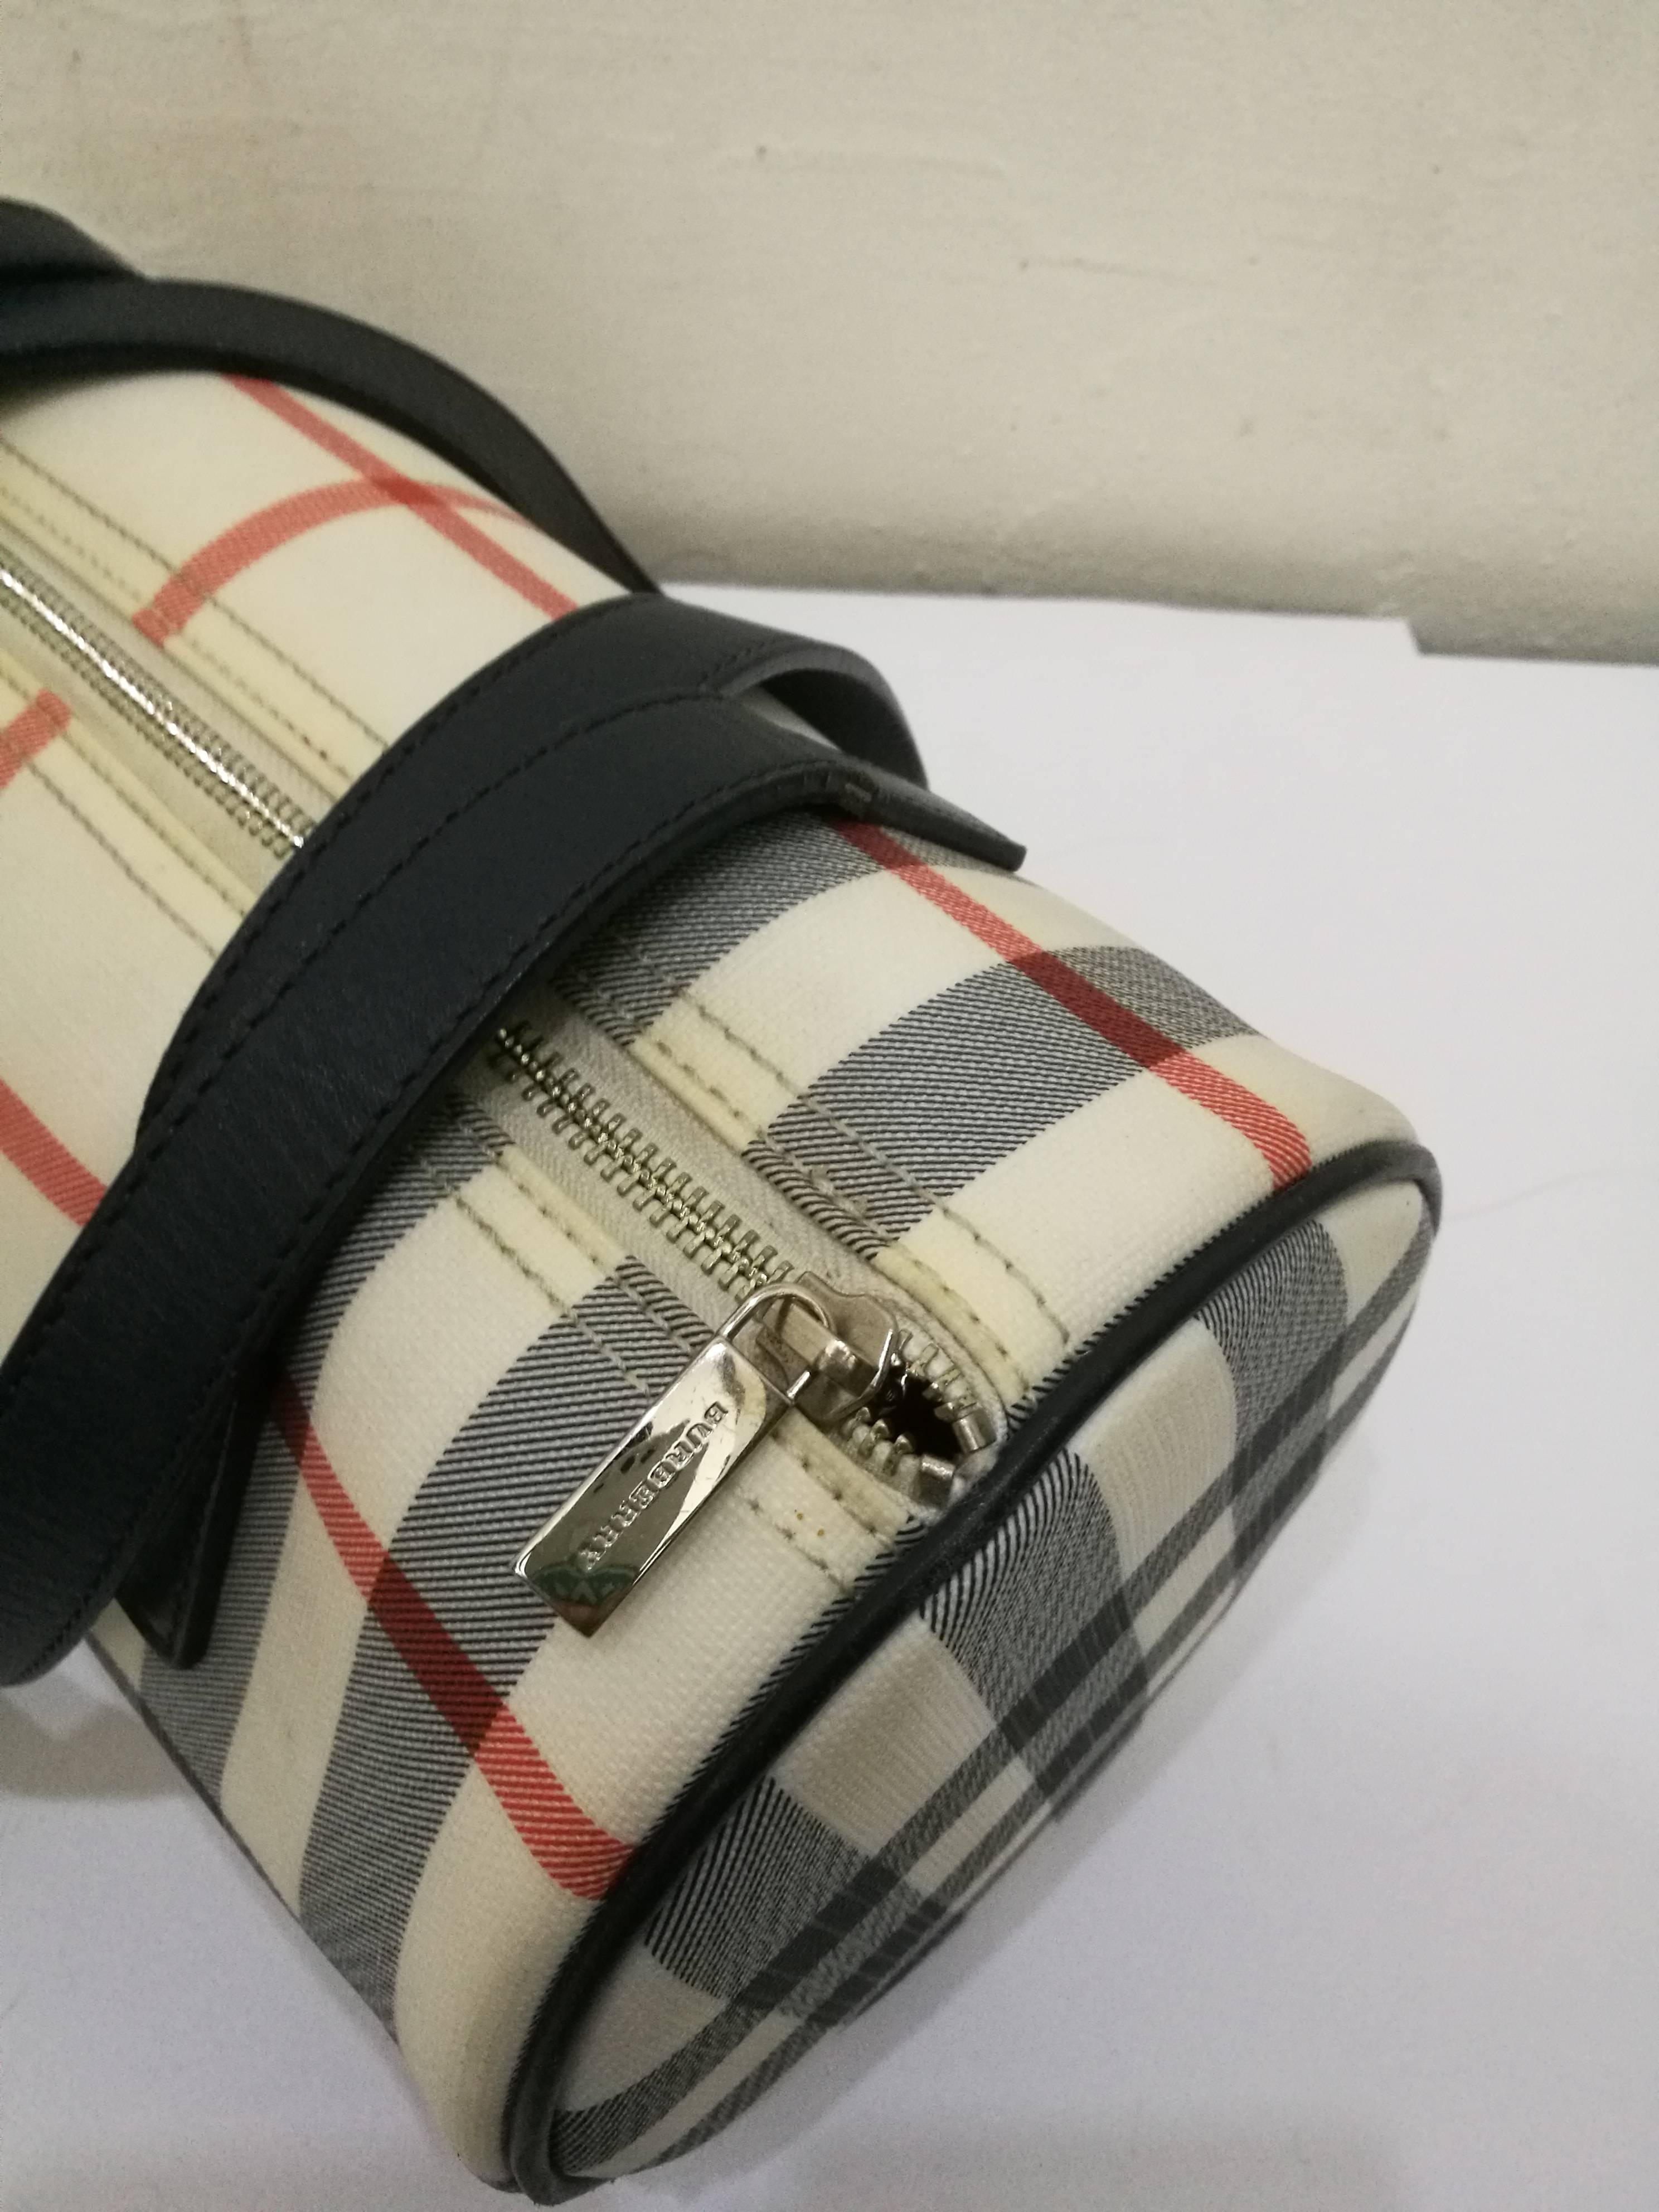 Burberry Papillon Bag
cream, black and red tone leather 'House Check' shoulder bag from Burberry.